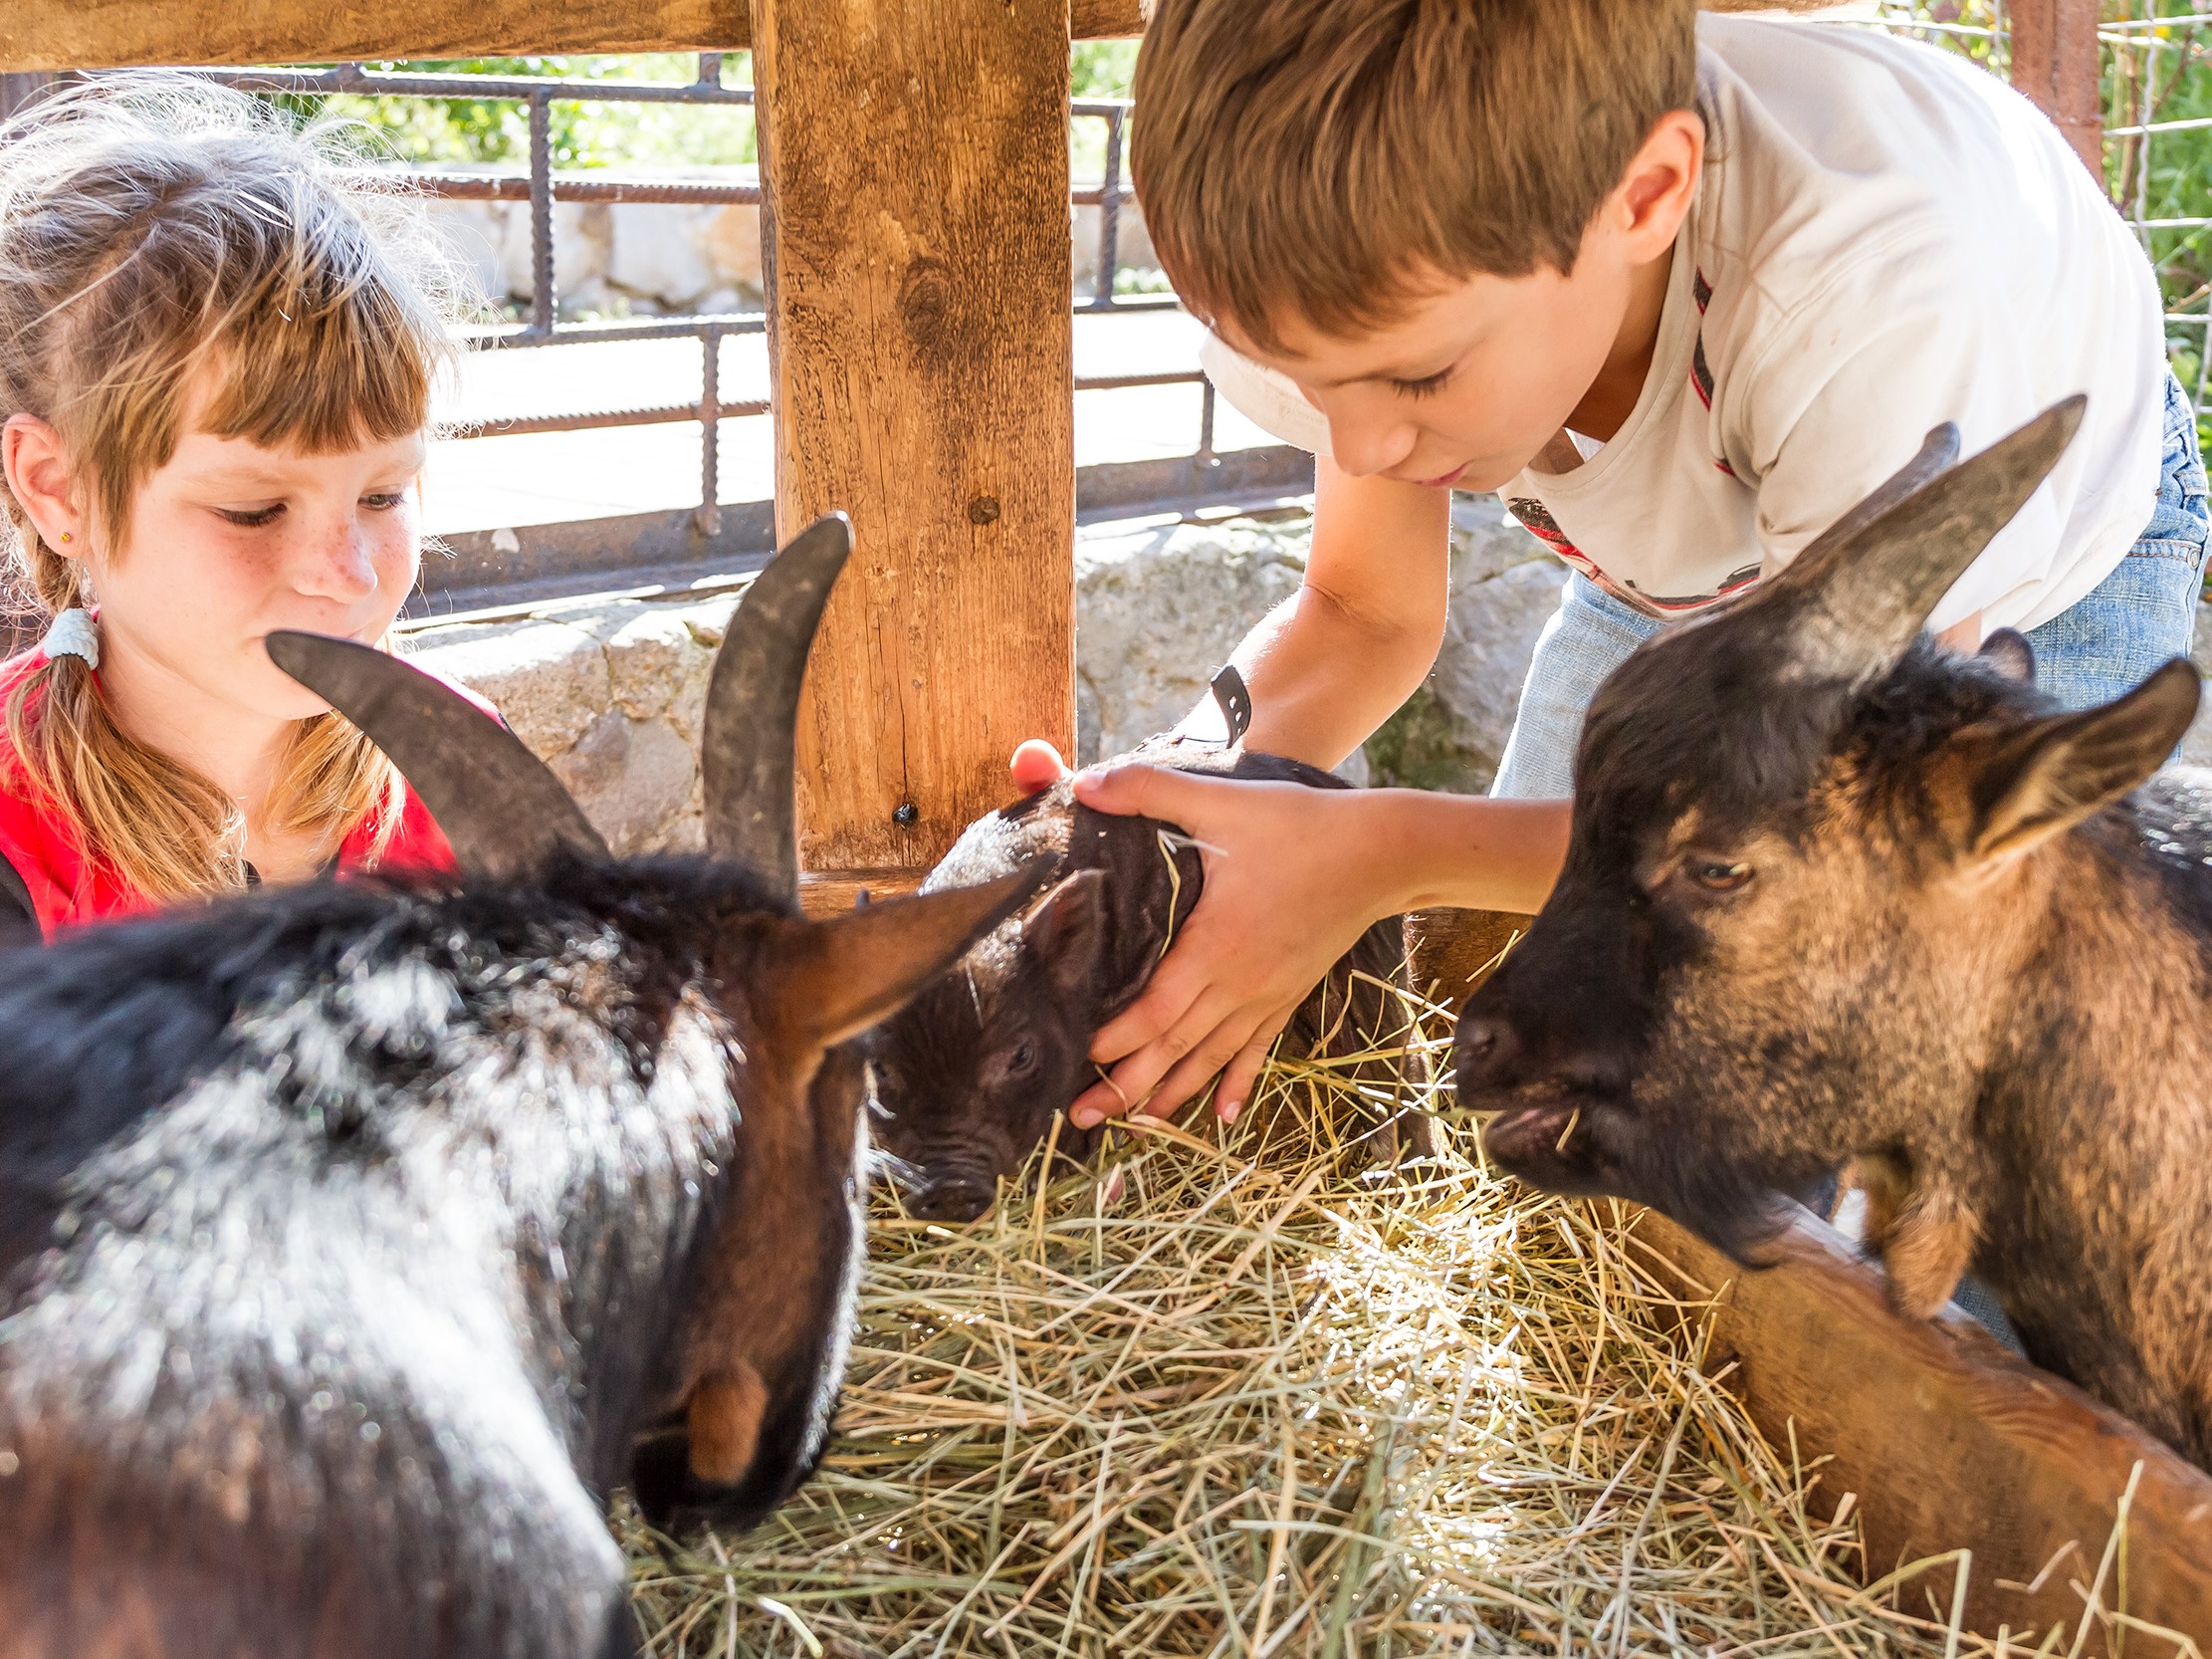 NSW Farmers is joining forces with primary producers statewide to offer farm-based experiences to primary-school students participating in the federally funded Kids to Farms program.